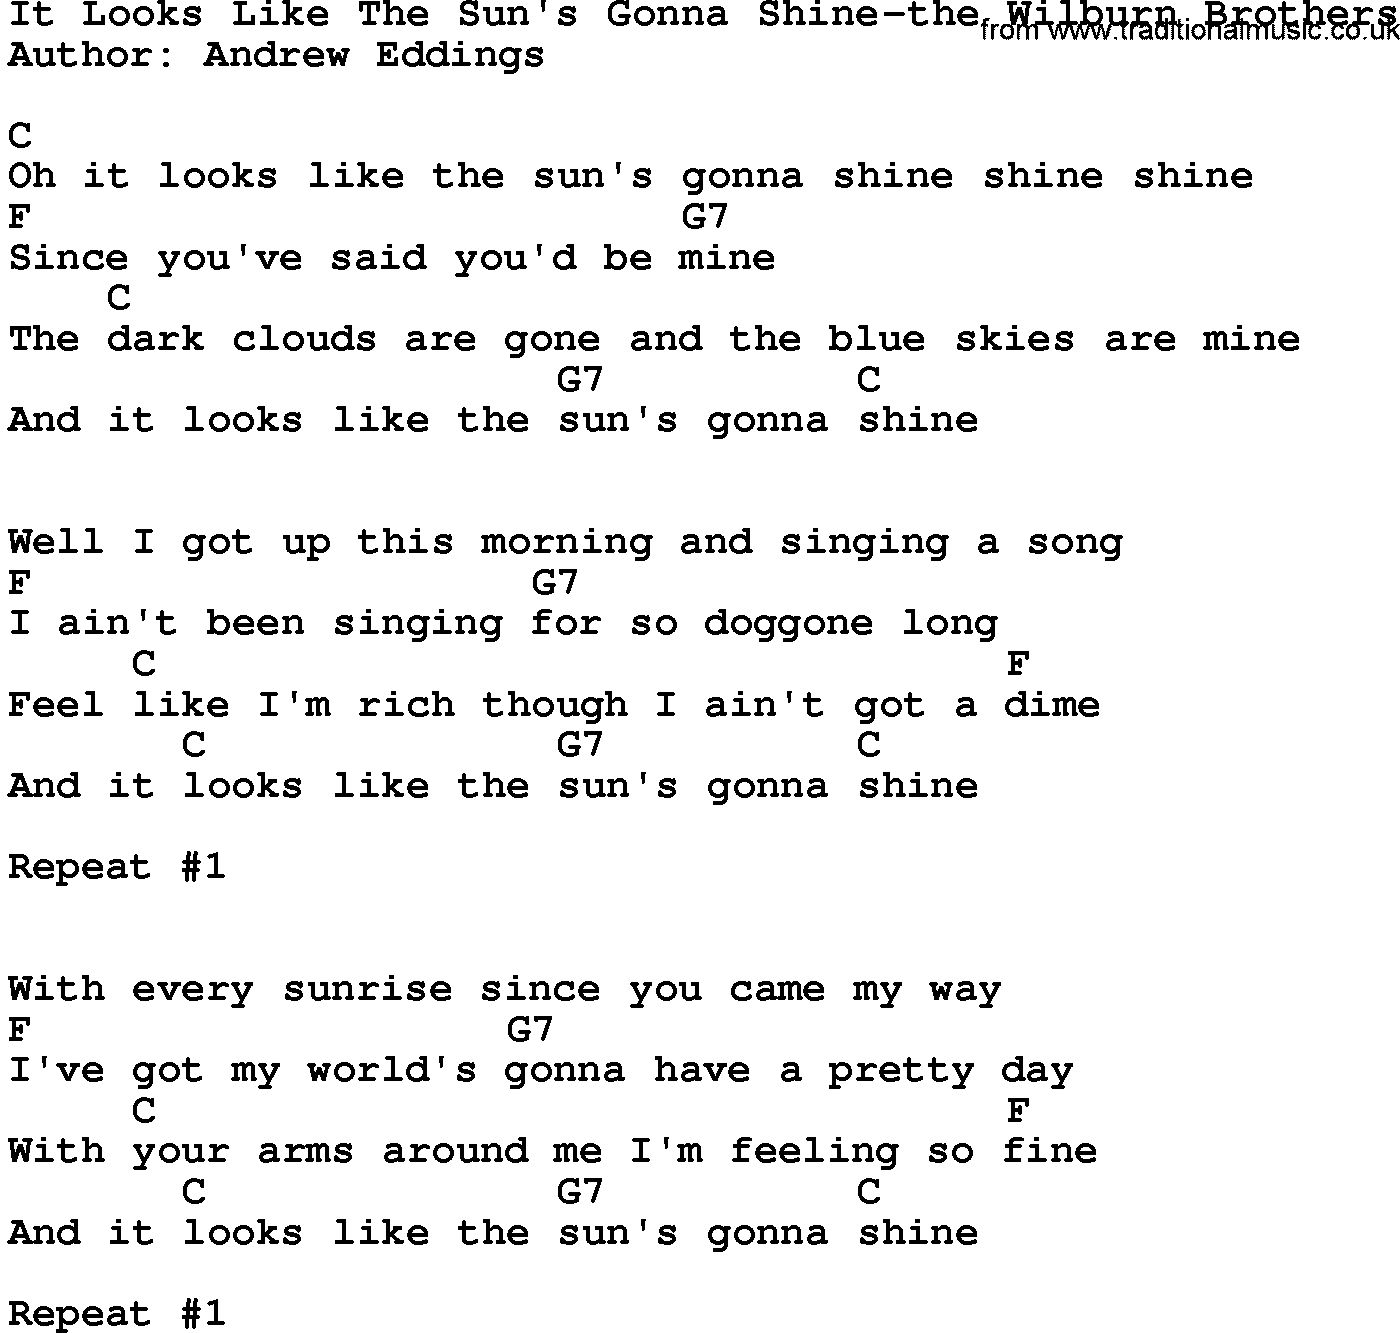 Country music song: It Looks Like The Sun's Gonna Shine-The Wilburn Brothers lyrics and chords